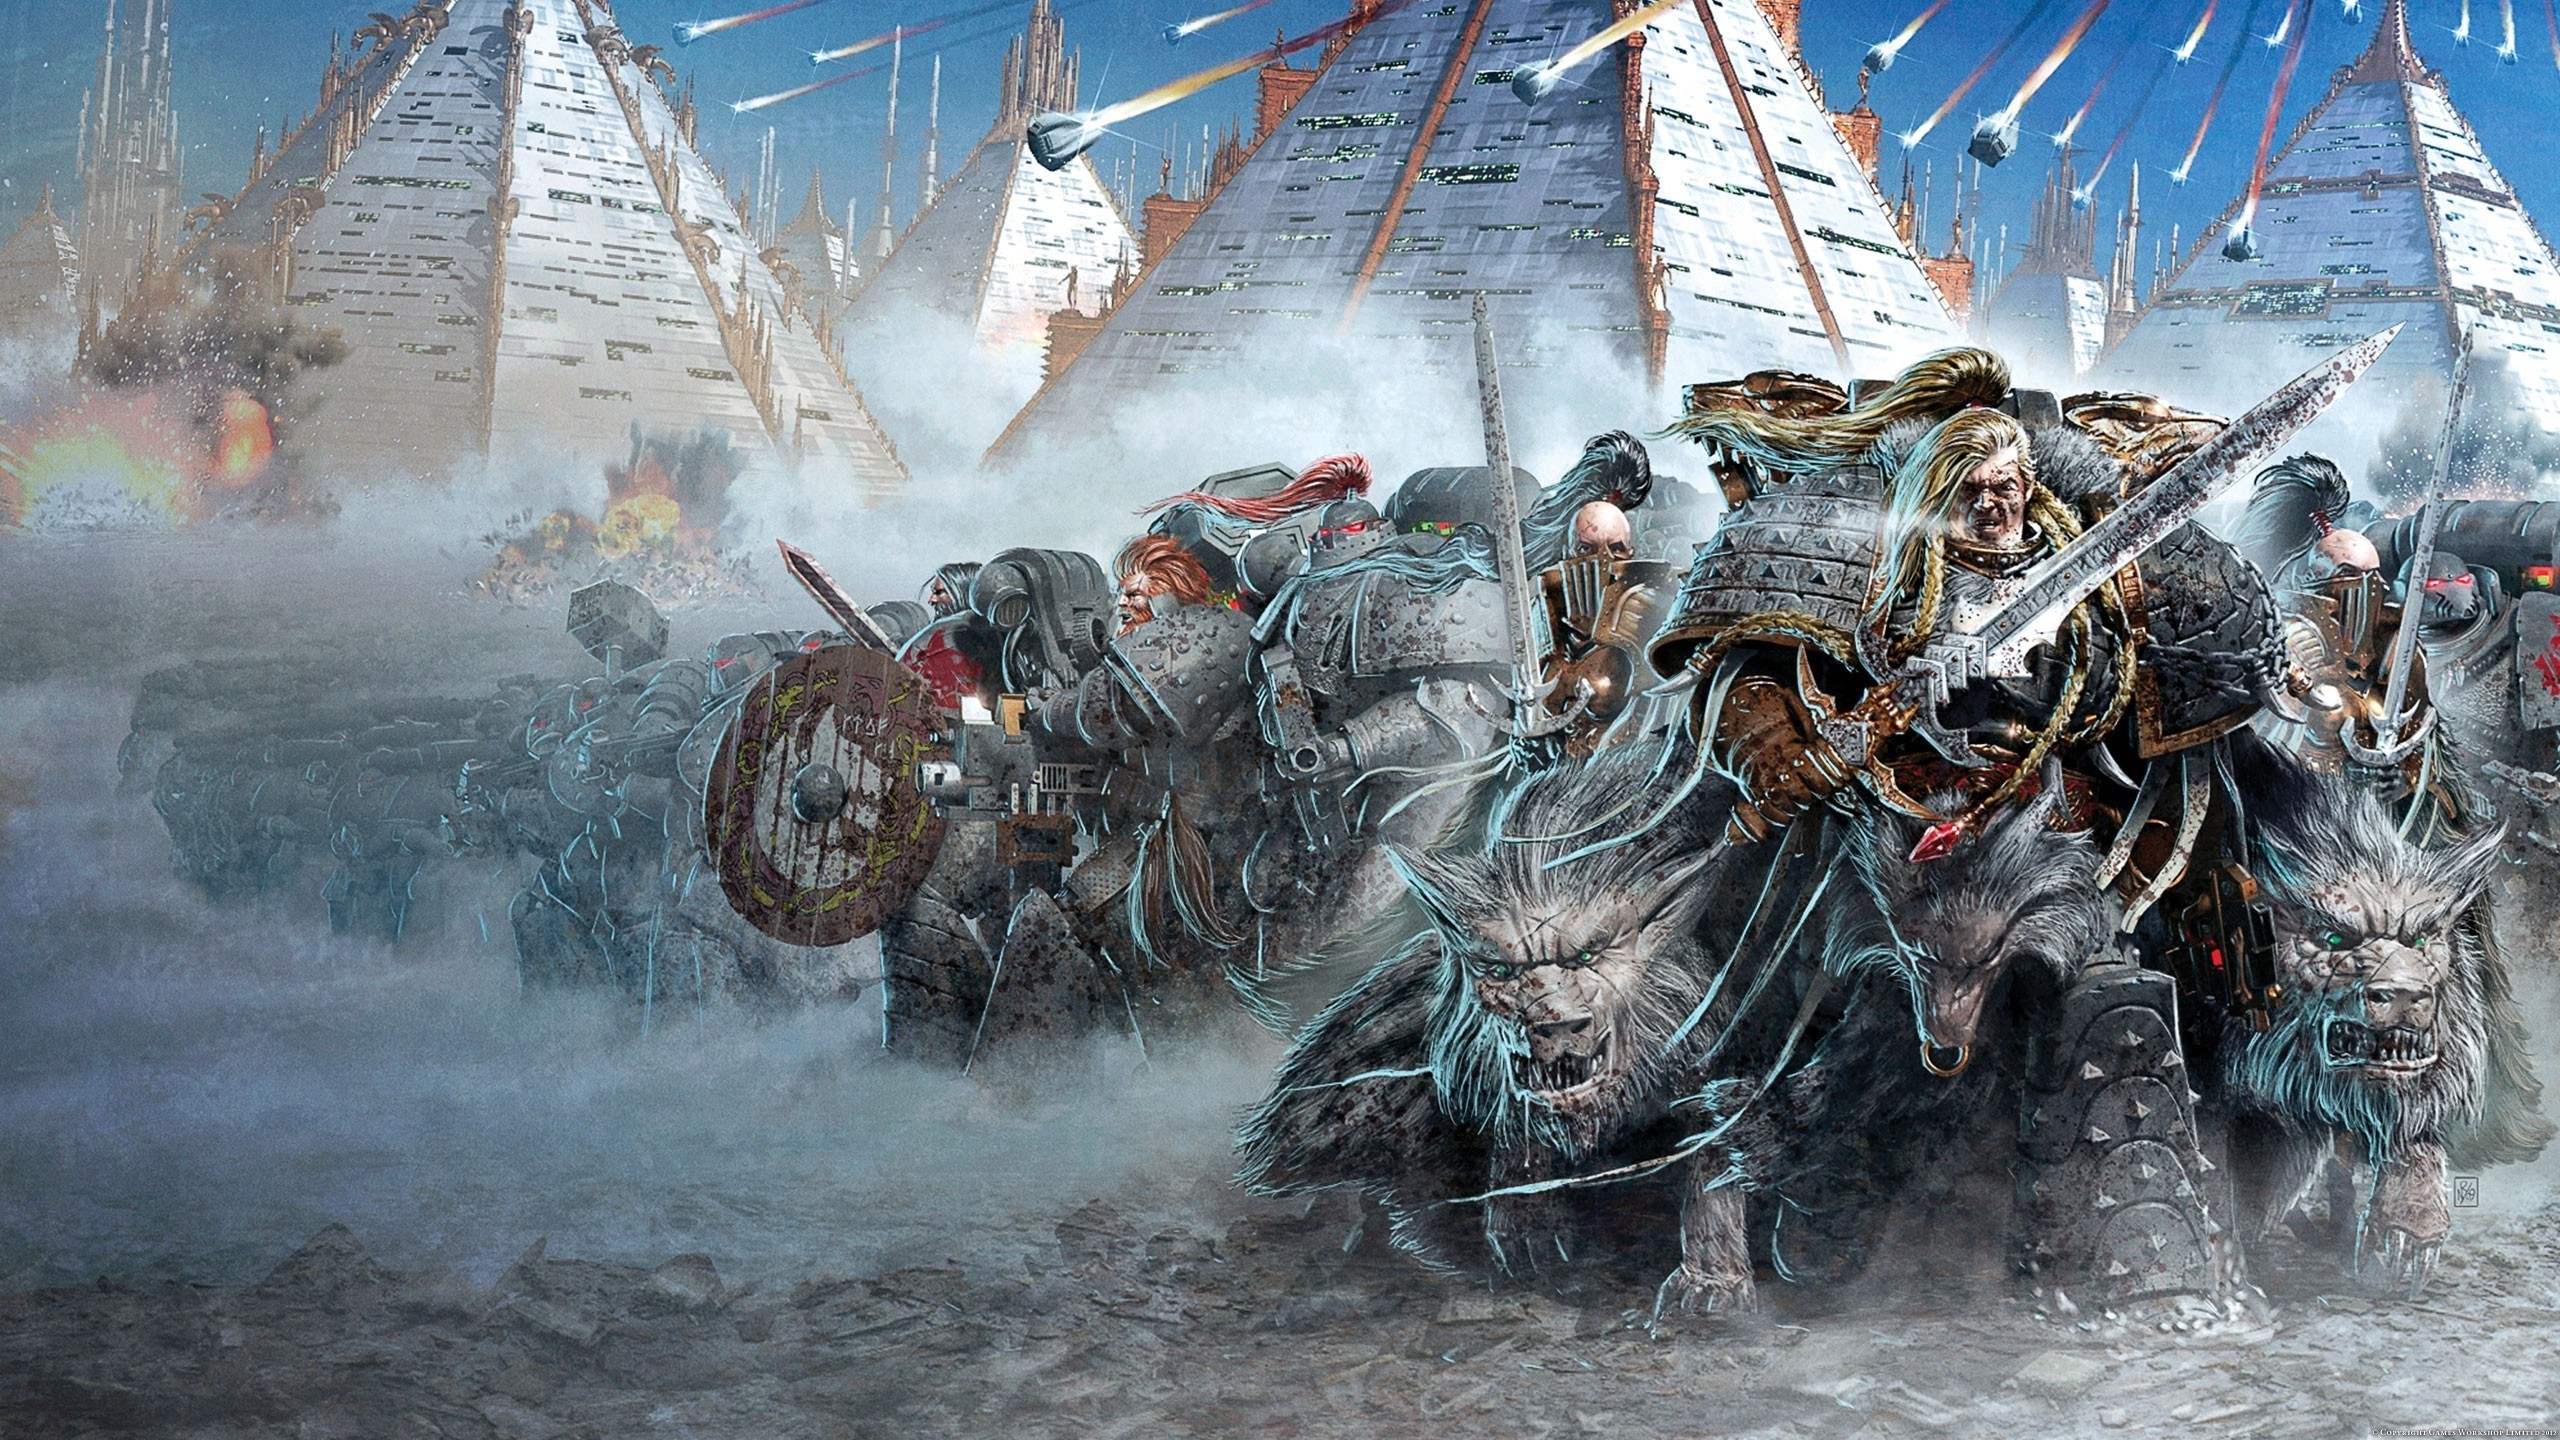 2560x1440 Widescreen Warhammer Images | Patty Mungia, 